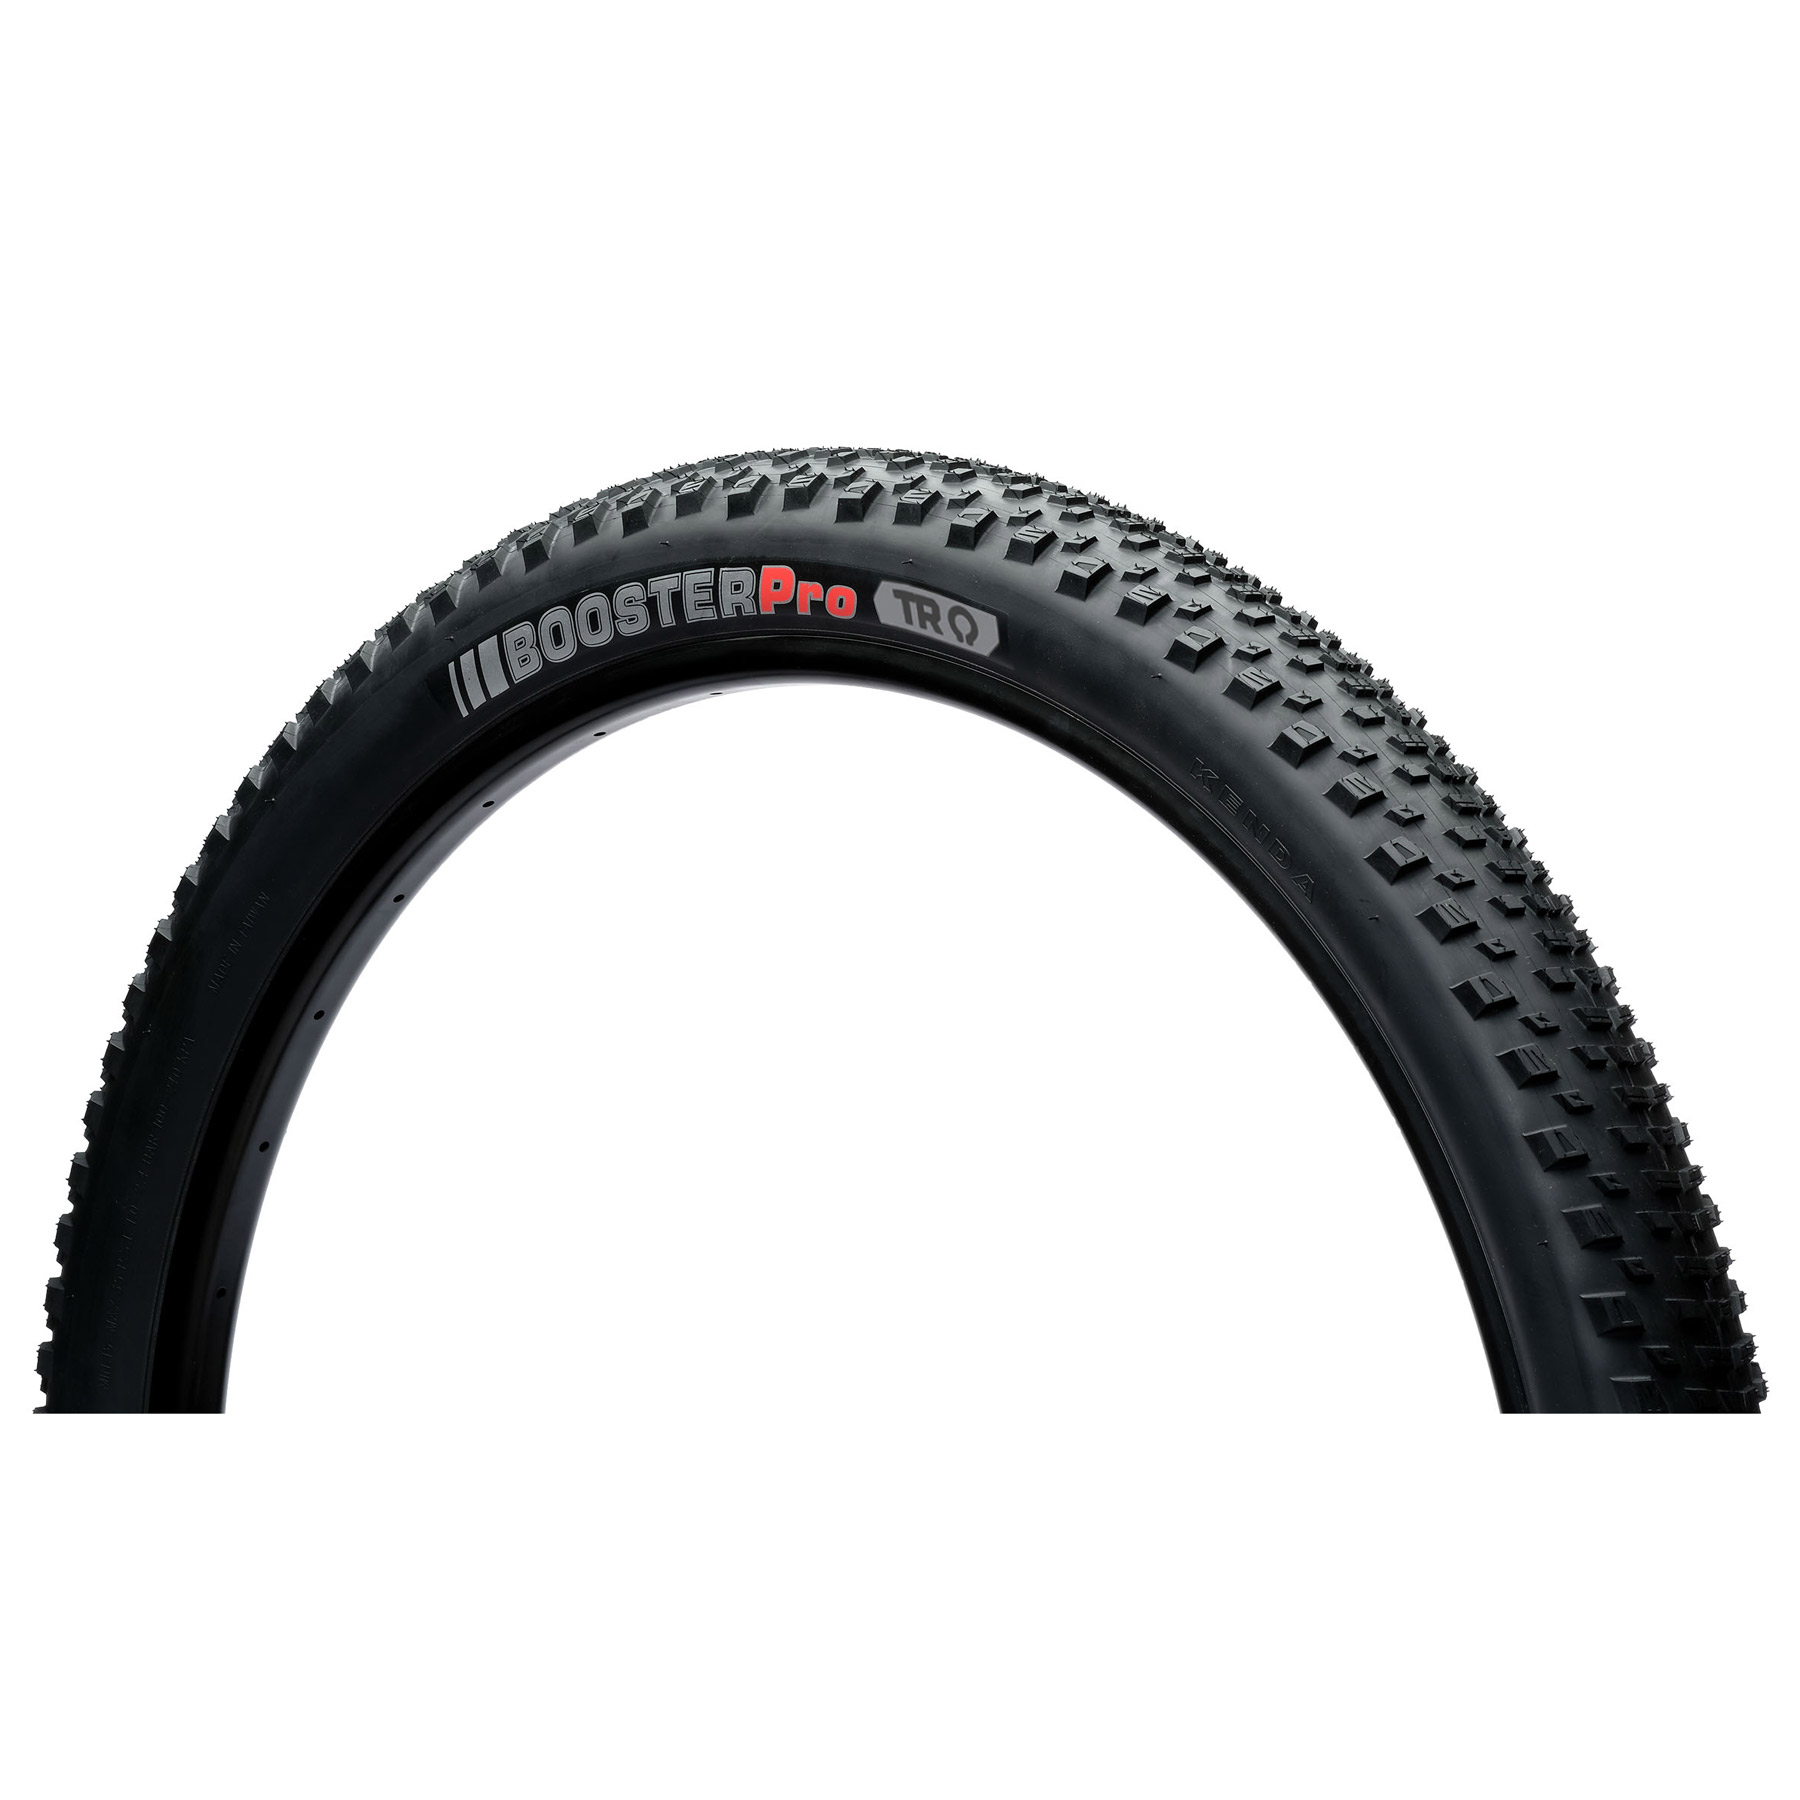 Picture of Kenda Booster Pro TR Folding Tire - 29x2.20 Inches